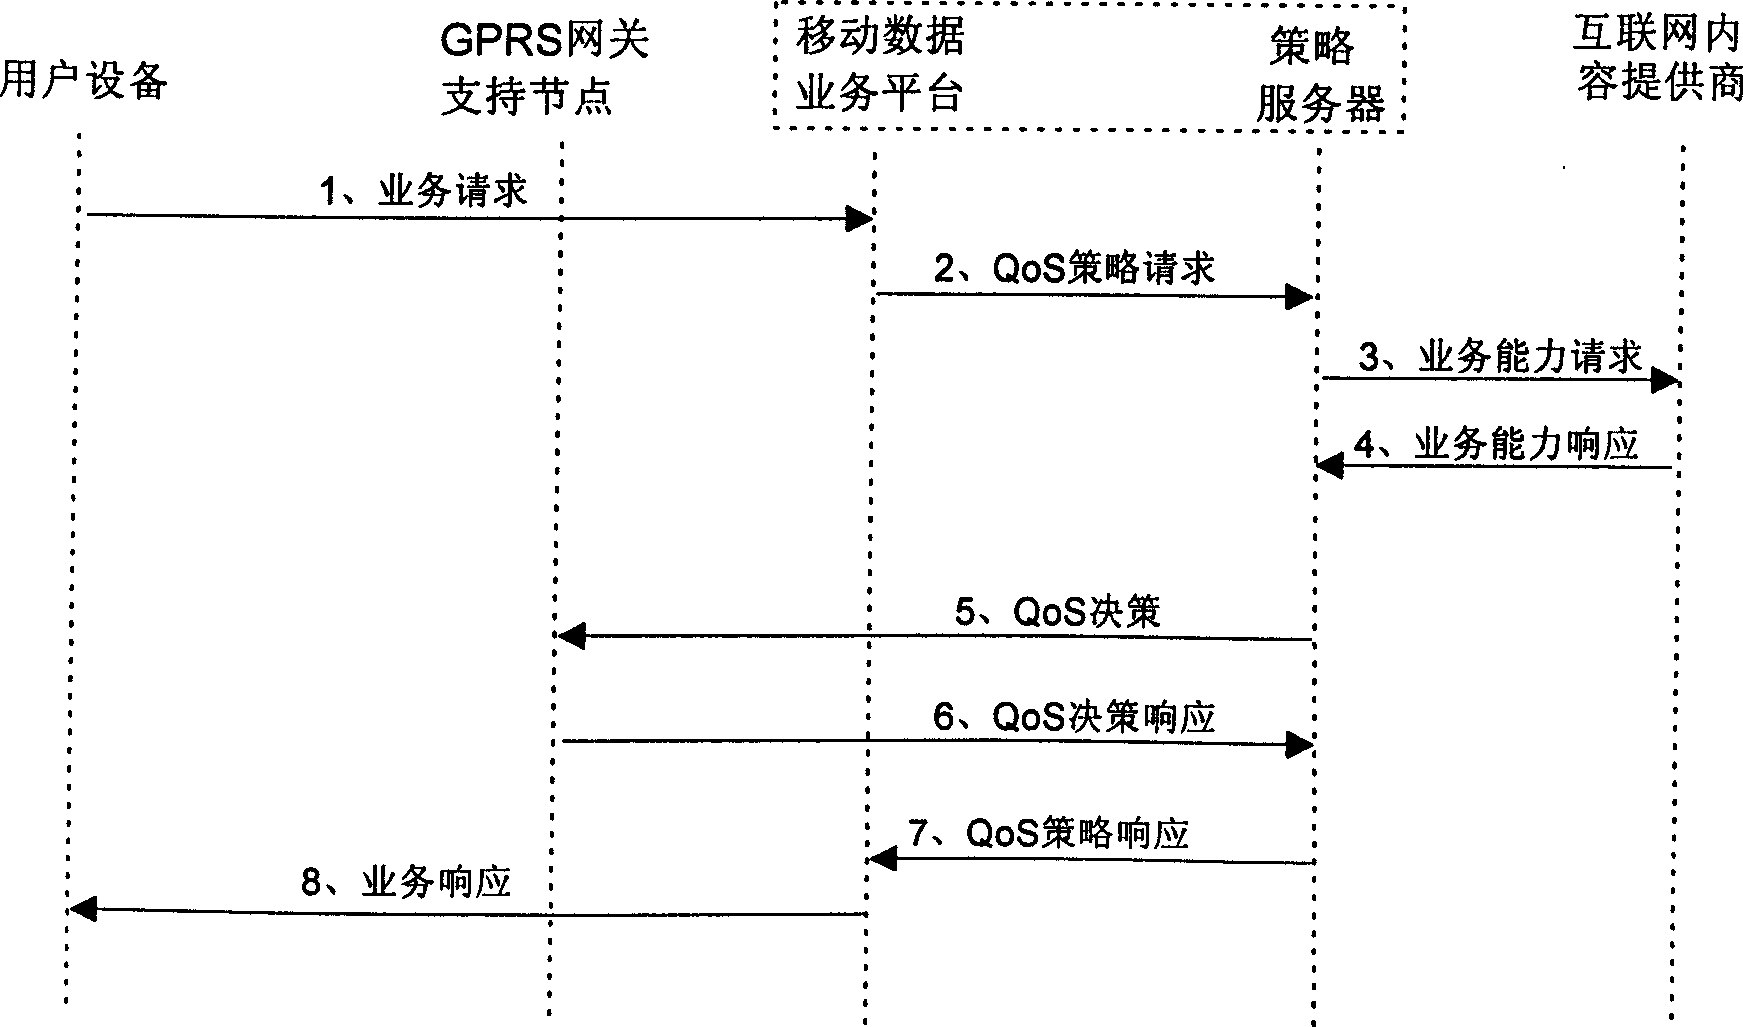 Service quality consulting method for wideband CDMA system